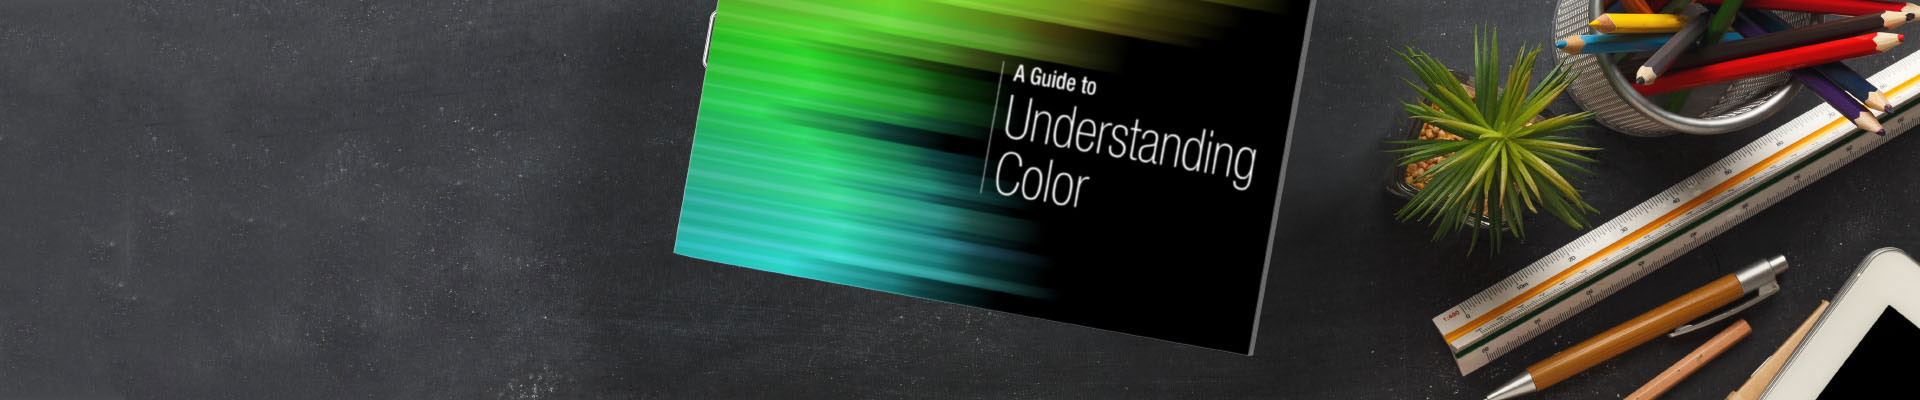 Guide to Understanding Color